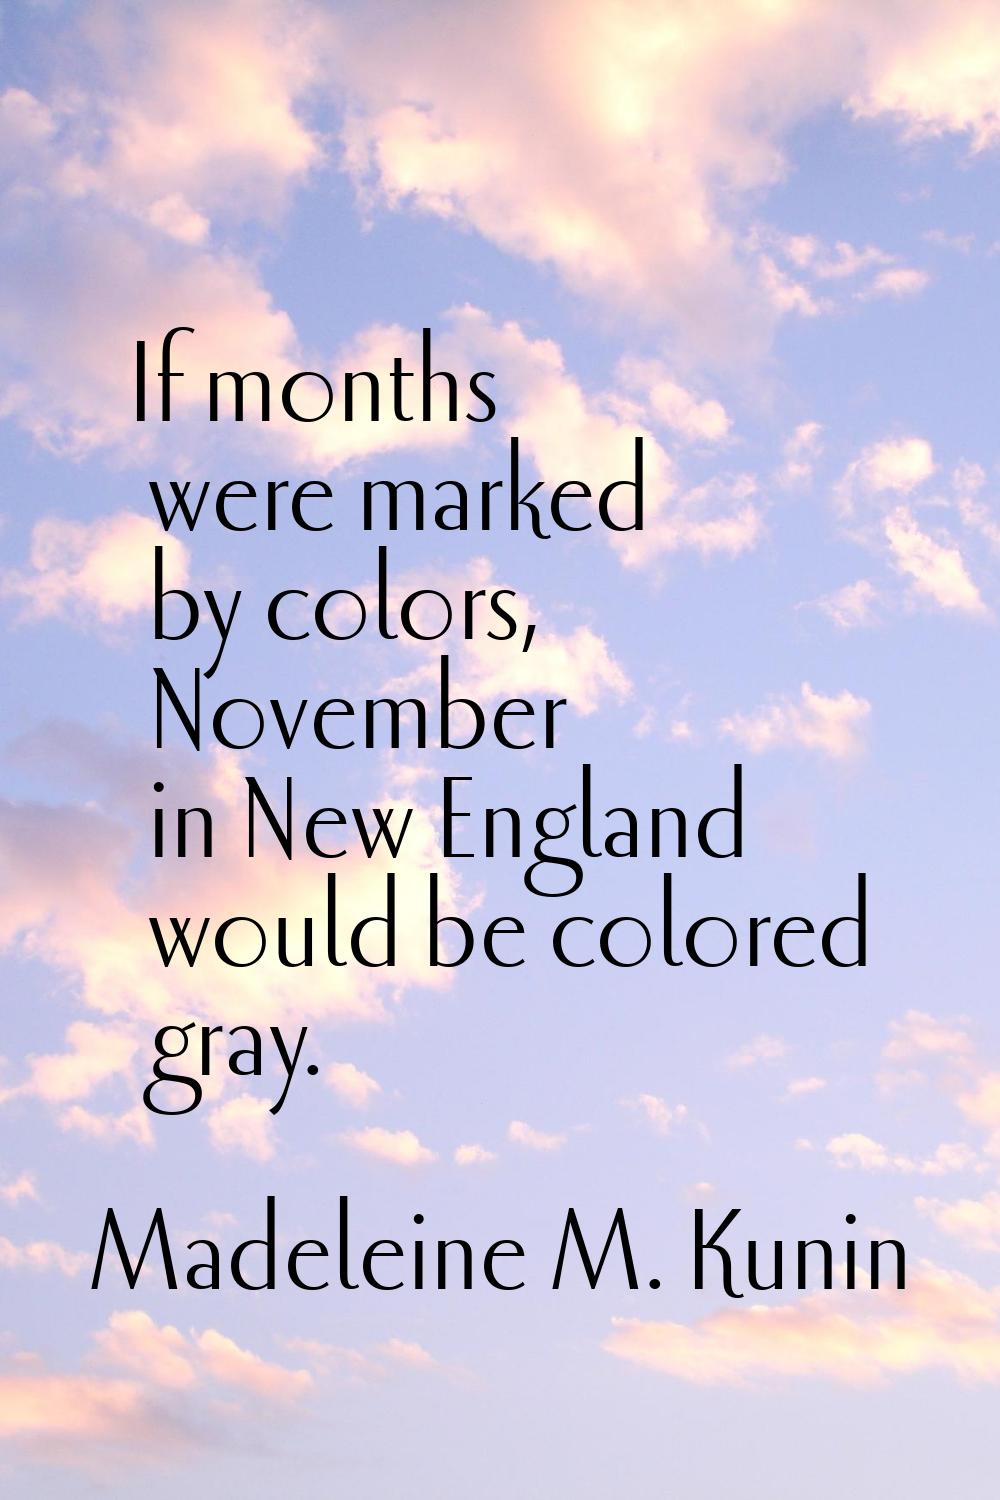 If months were marked by colors, November in New England would be colored gray.